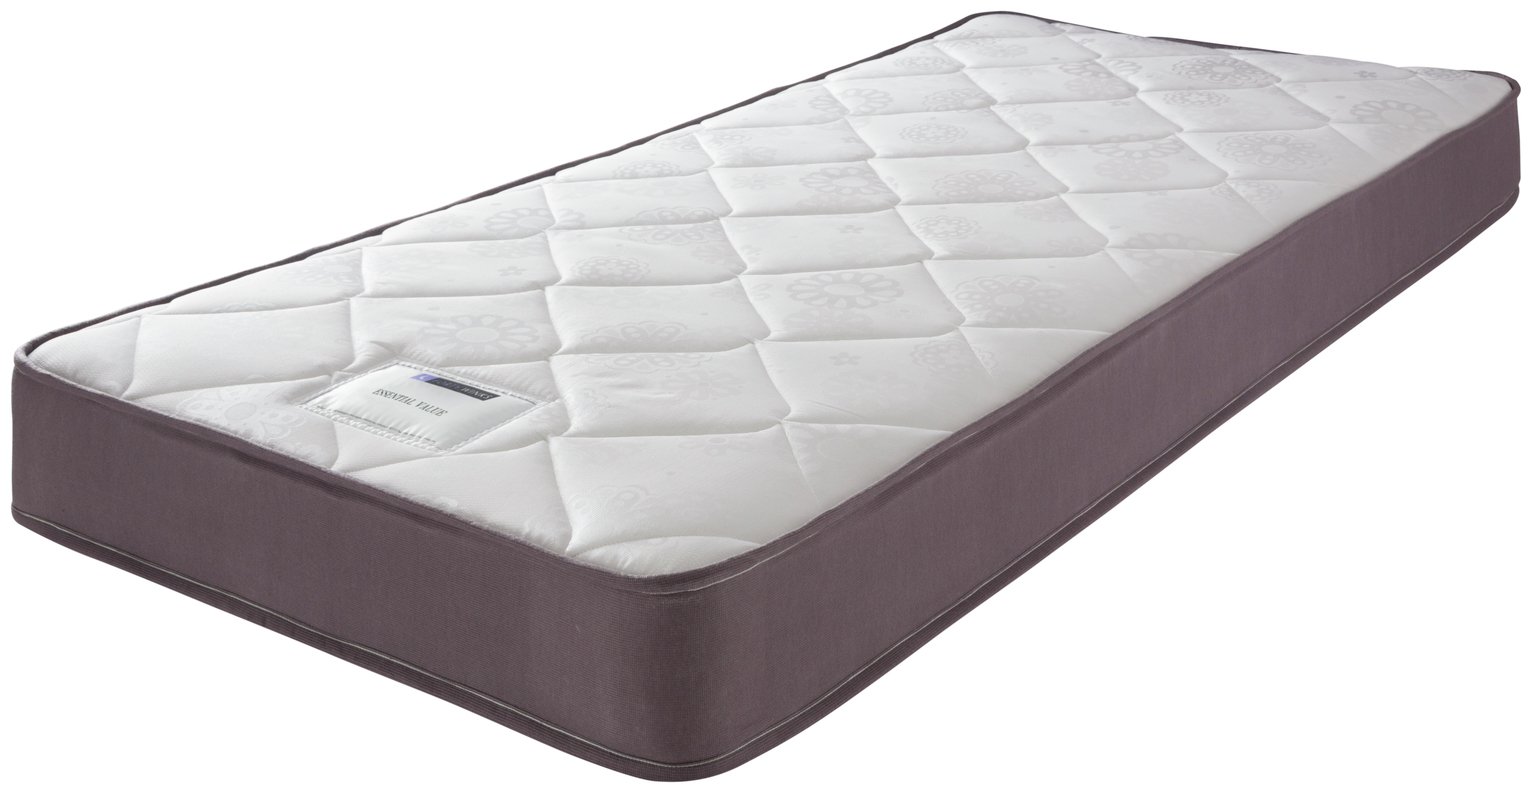 forty winks mattress review south africa